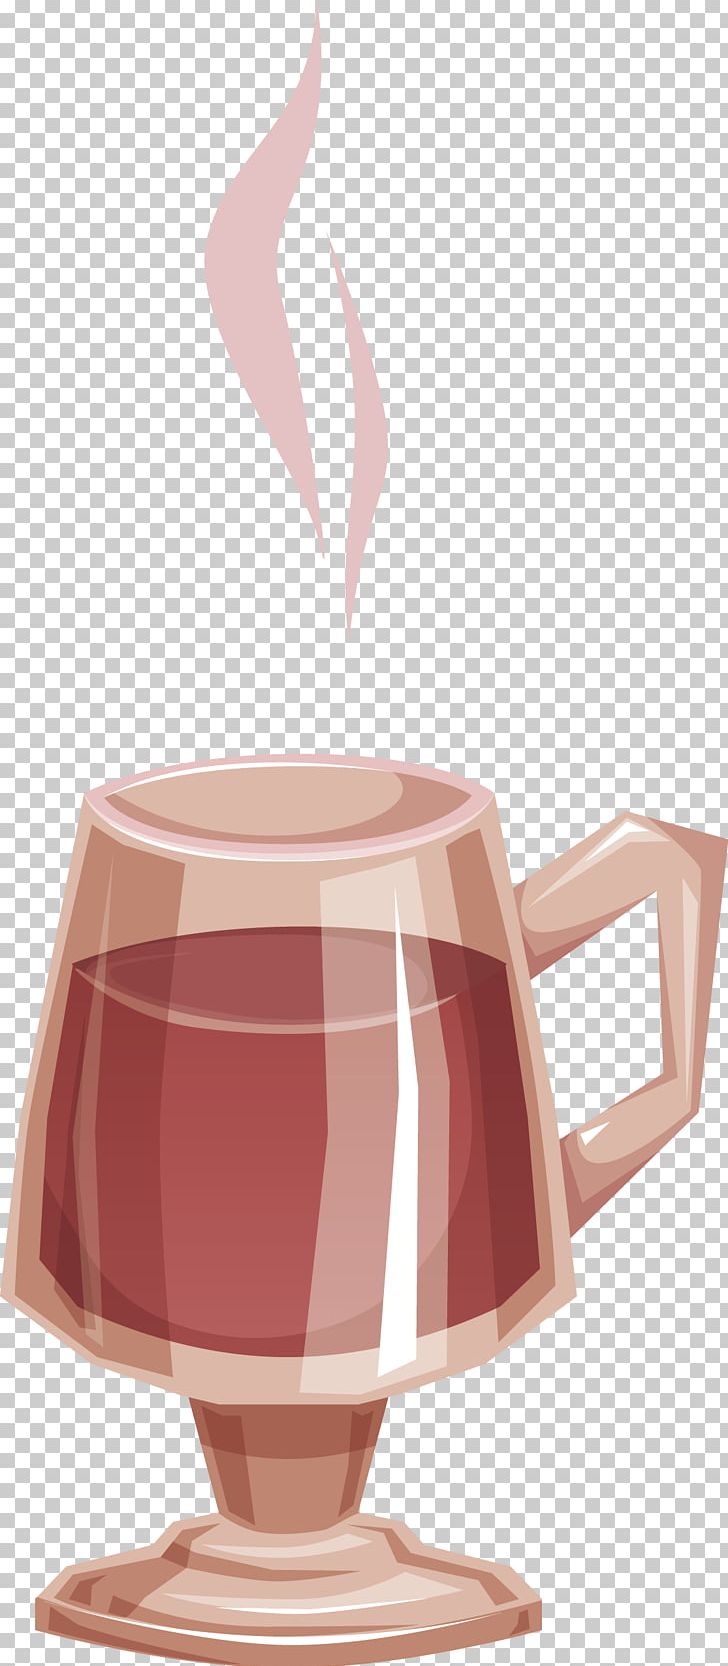 Tea Hot Chocolate PNG, Clipart, Adobe Illustrator, Bubble Tea, Chocolate, Coffee Cup, Cup Free PNG Download